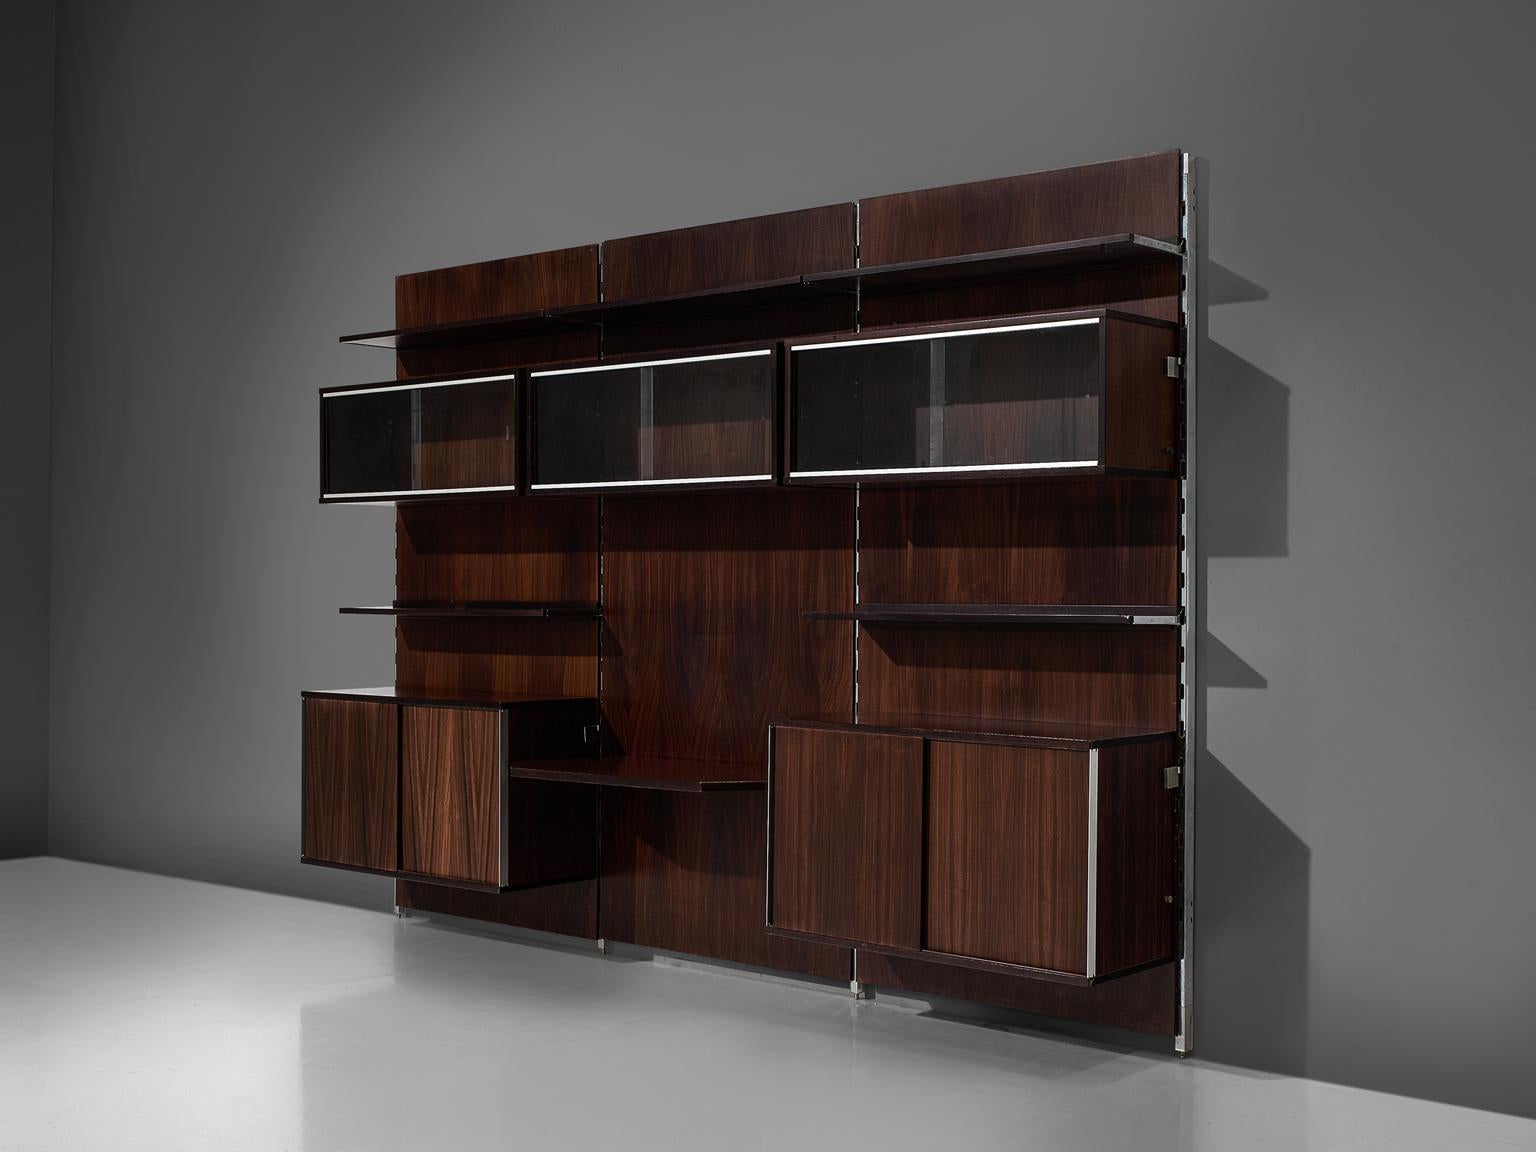 MIM Roma, cabinet, rosewood and metal, Italy, 1960s.

The monumental wall-mounted cabinet consists of three wall panels with various storage facilities. The finish and details of this shelving wall unit are of a high standard. The piece would cover